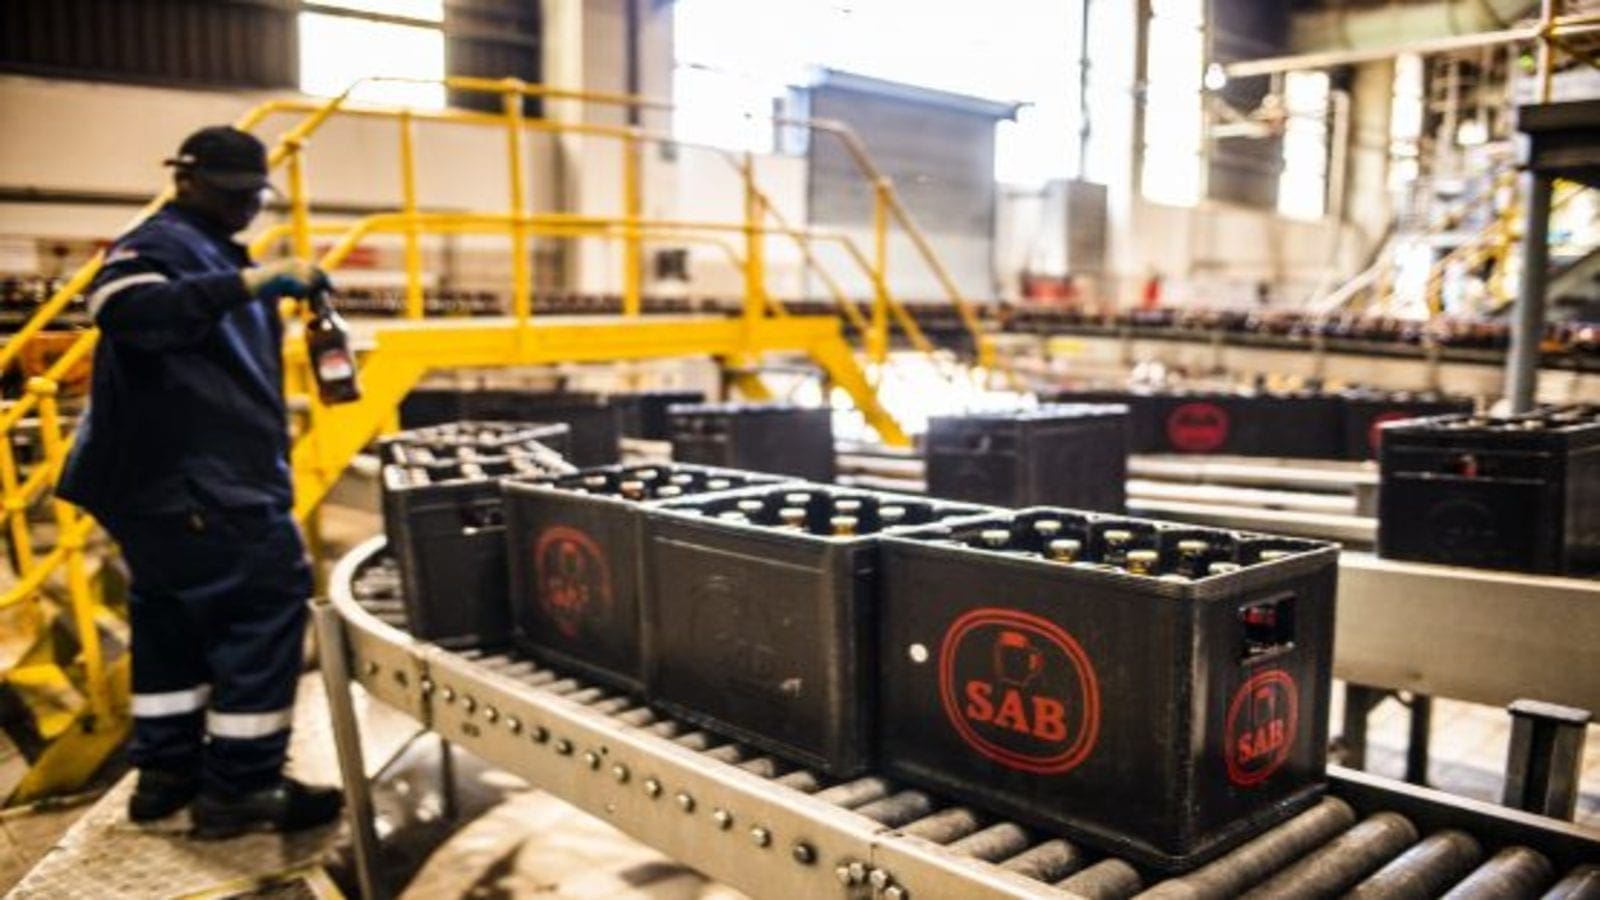 South African Breweries completes US$320m capacity upgrades at two major plants 